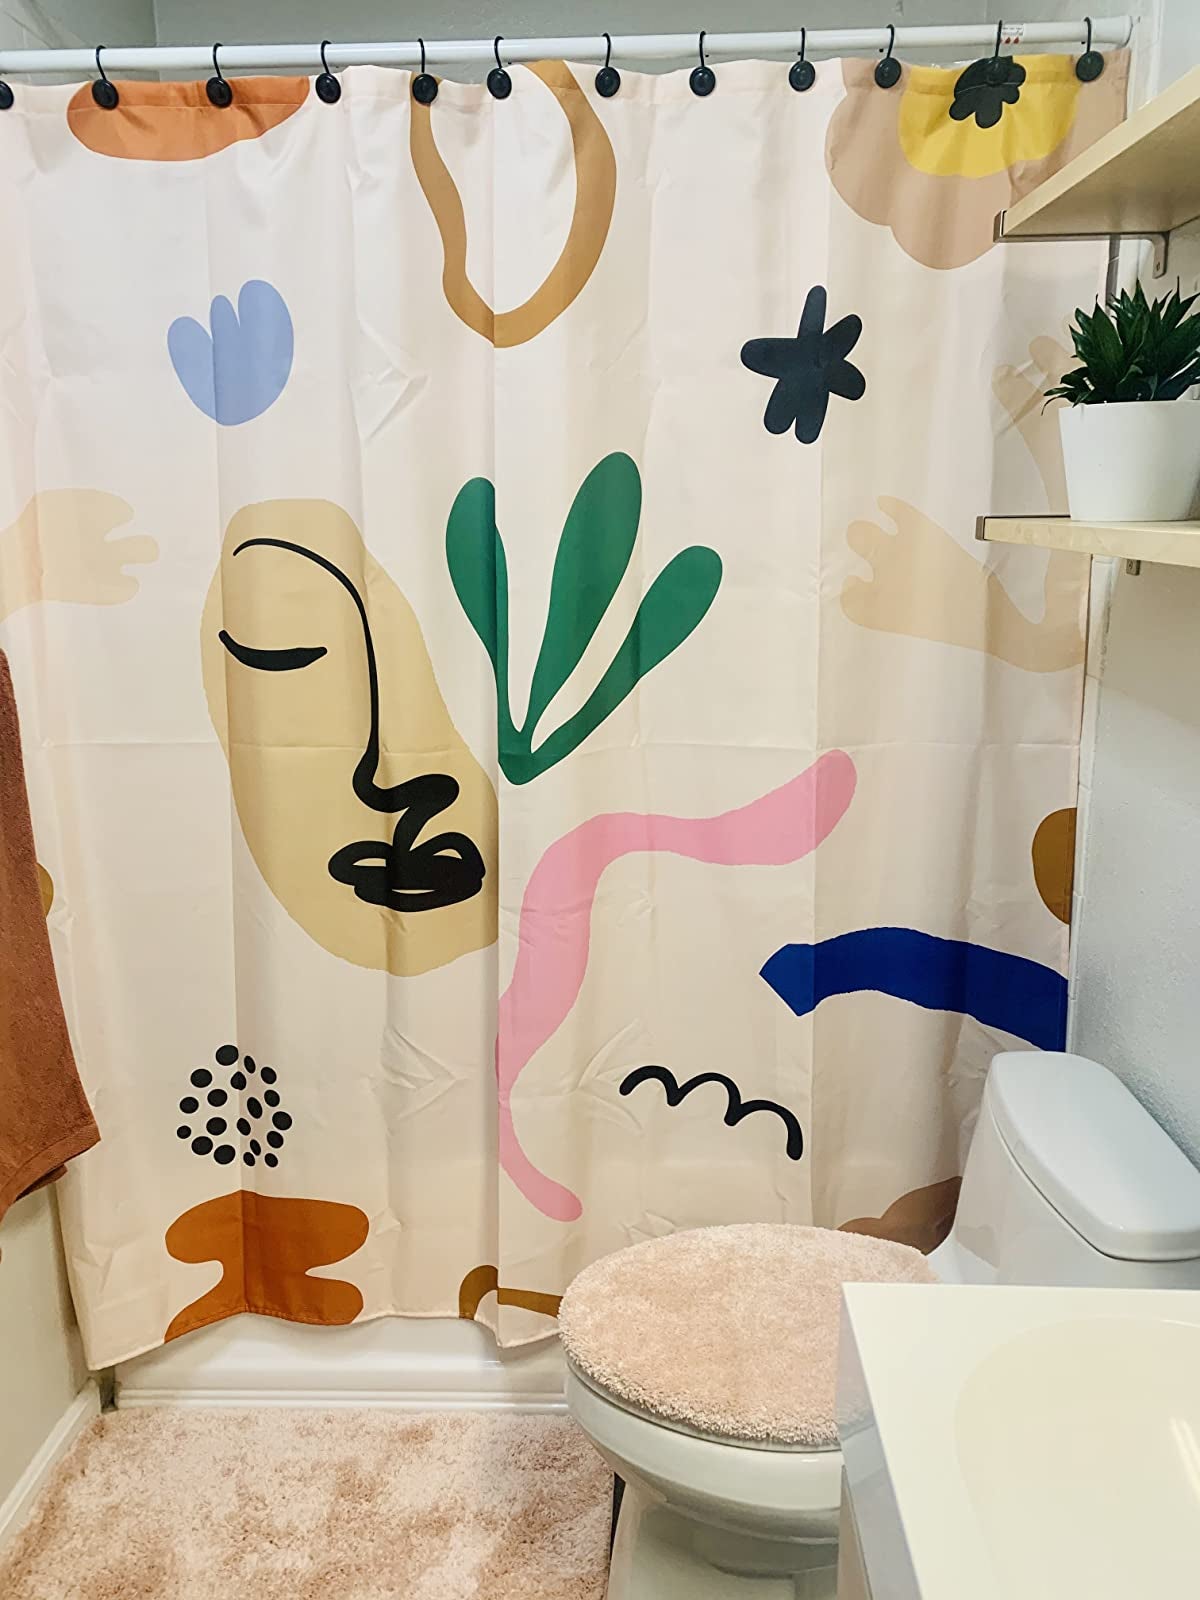 image of the minimalist abstract shower curtain hanging in a reviewer's bathroom